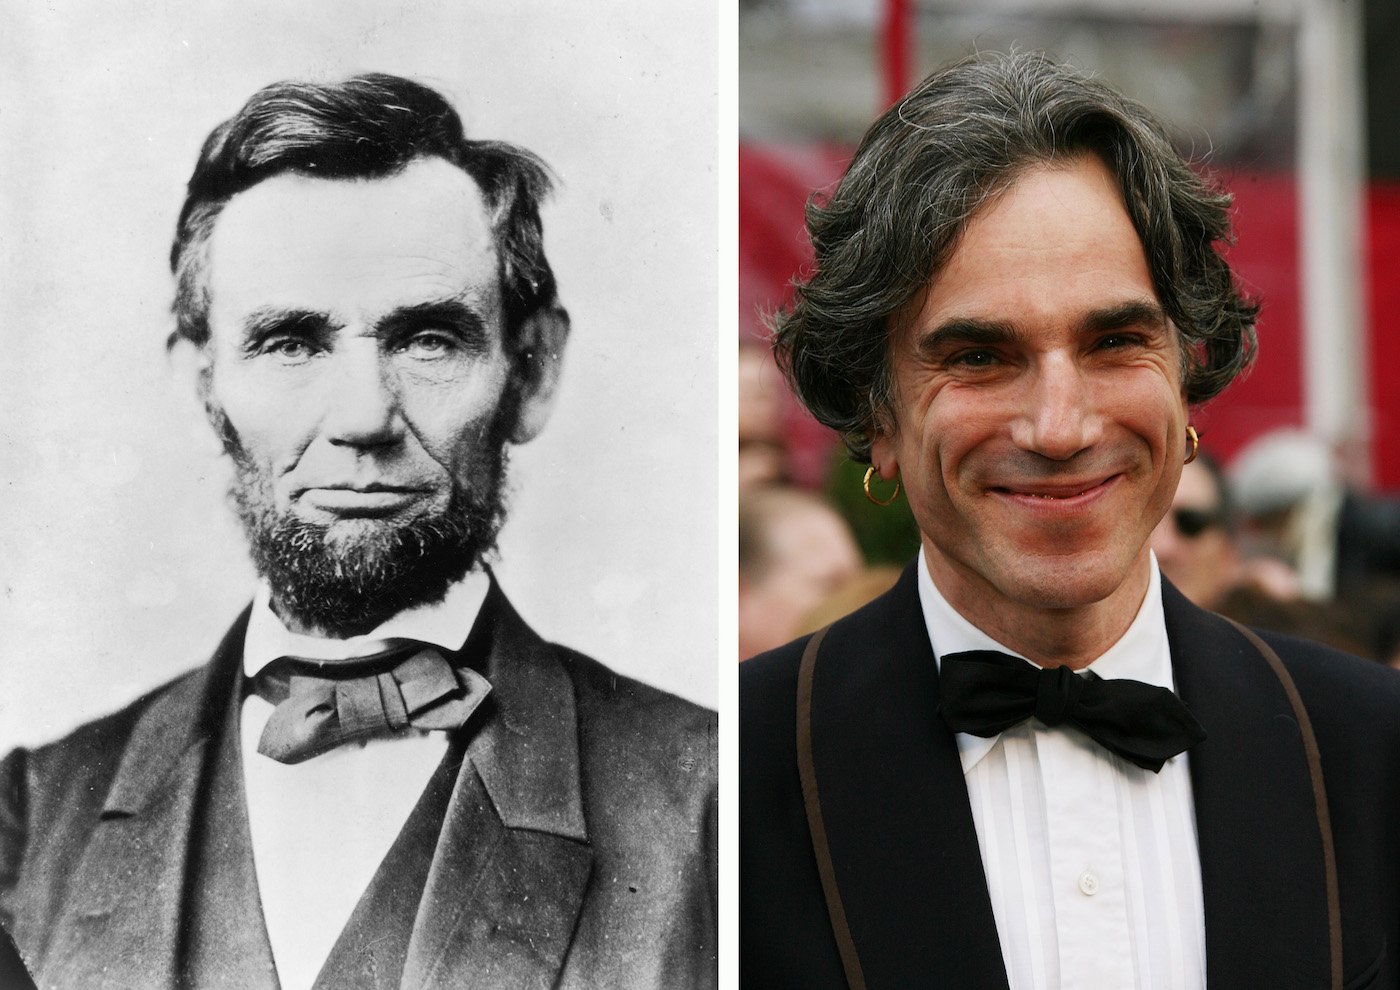 A composite image showing a comparison between Abraham Lincoln and actor Daniel Day-Lewis